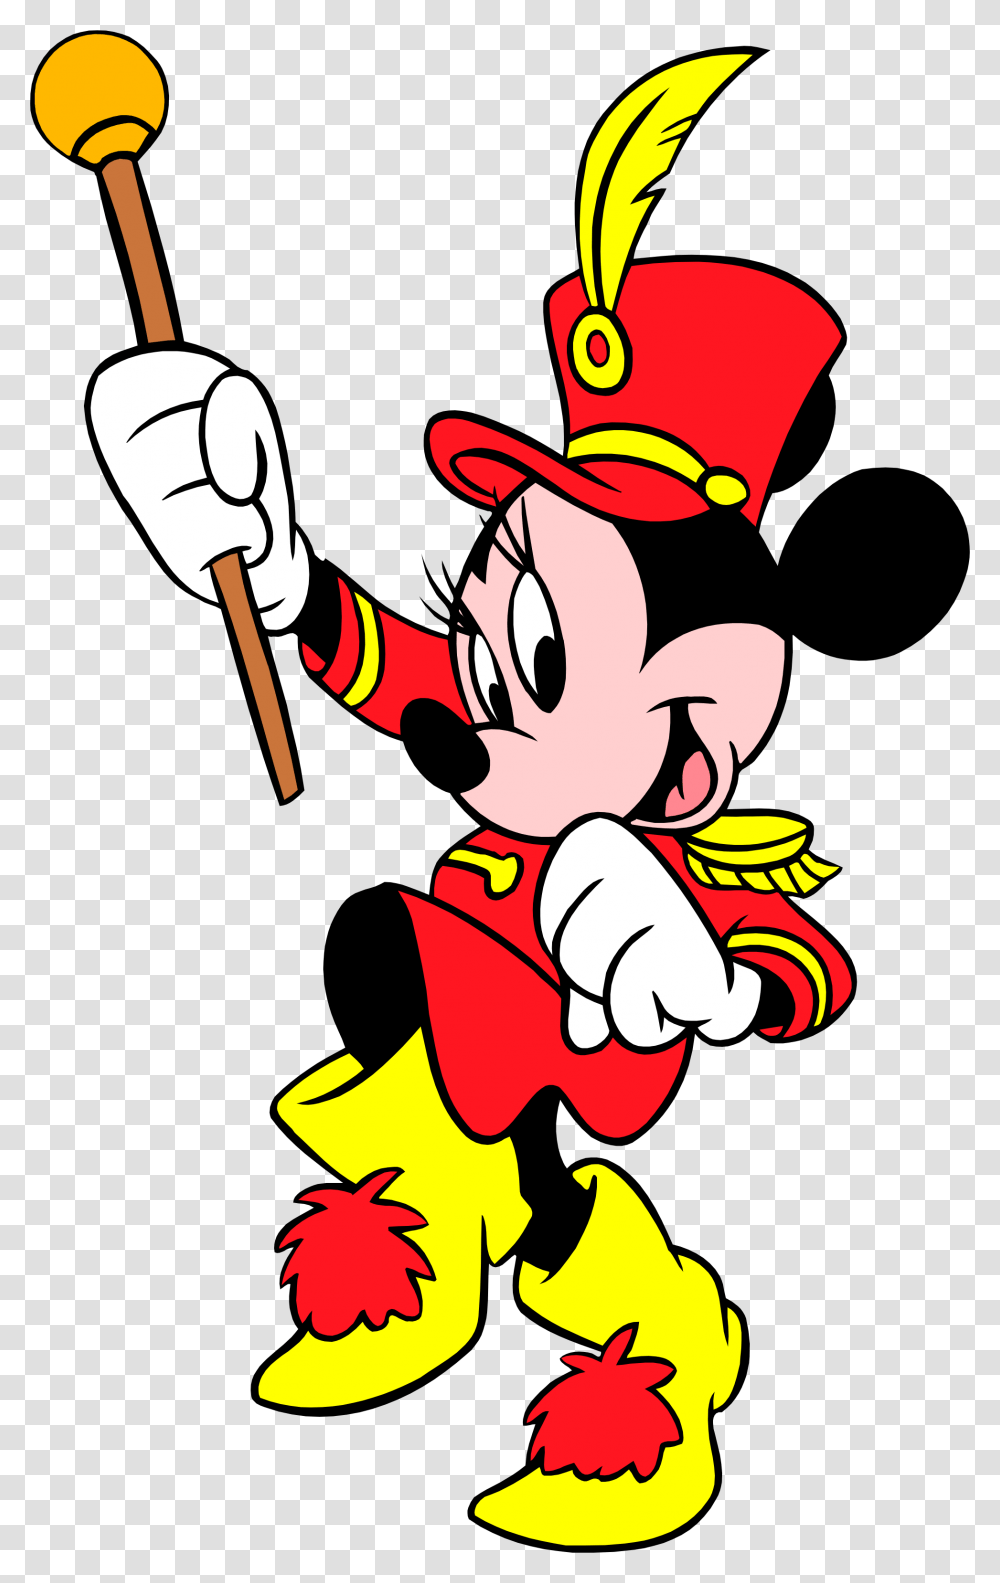 Minie Mouse 12 By Convitex Minnie Mouse Parade Cartoon, Performer, Juggling, Doodle Transparent Png